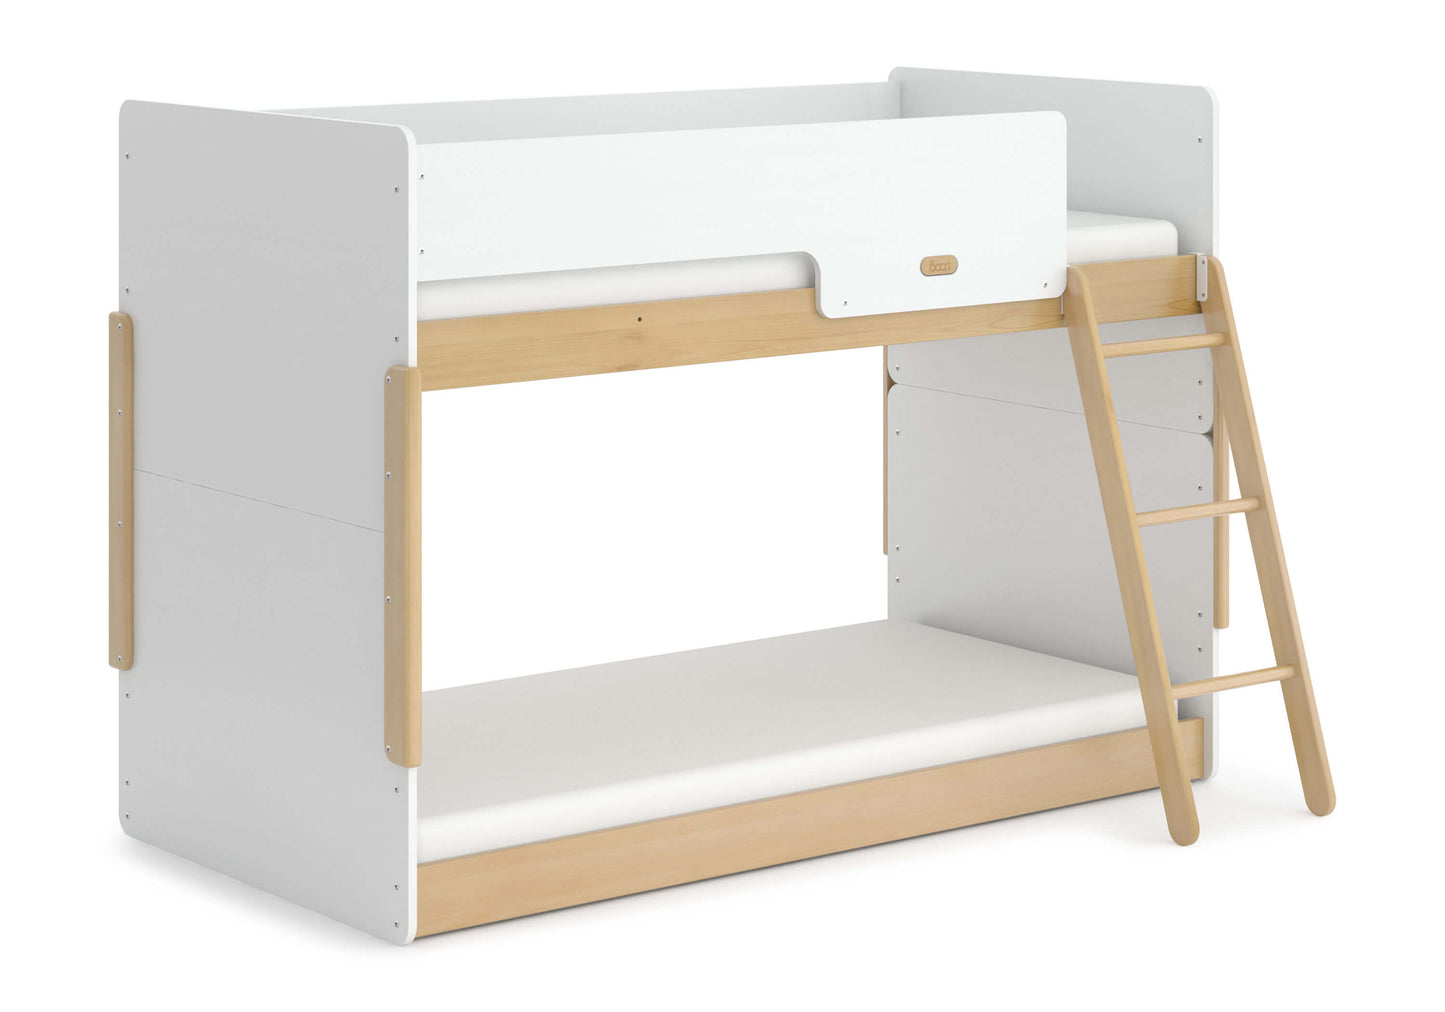 Barley White & Almond, Kids Beds, Kids beds frames, kids single bed, space saving kids beds, double-decker bed, bunk bed Malaysia